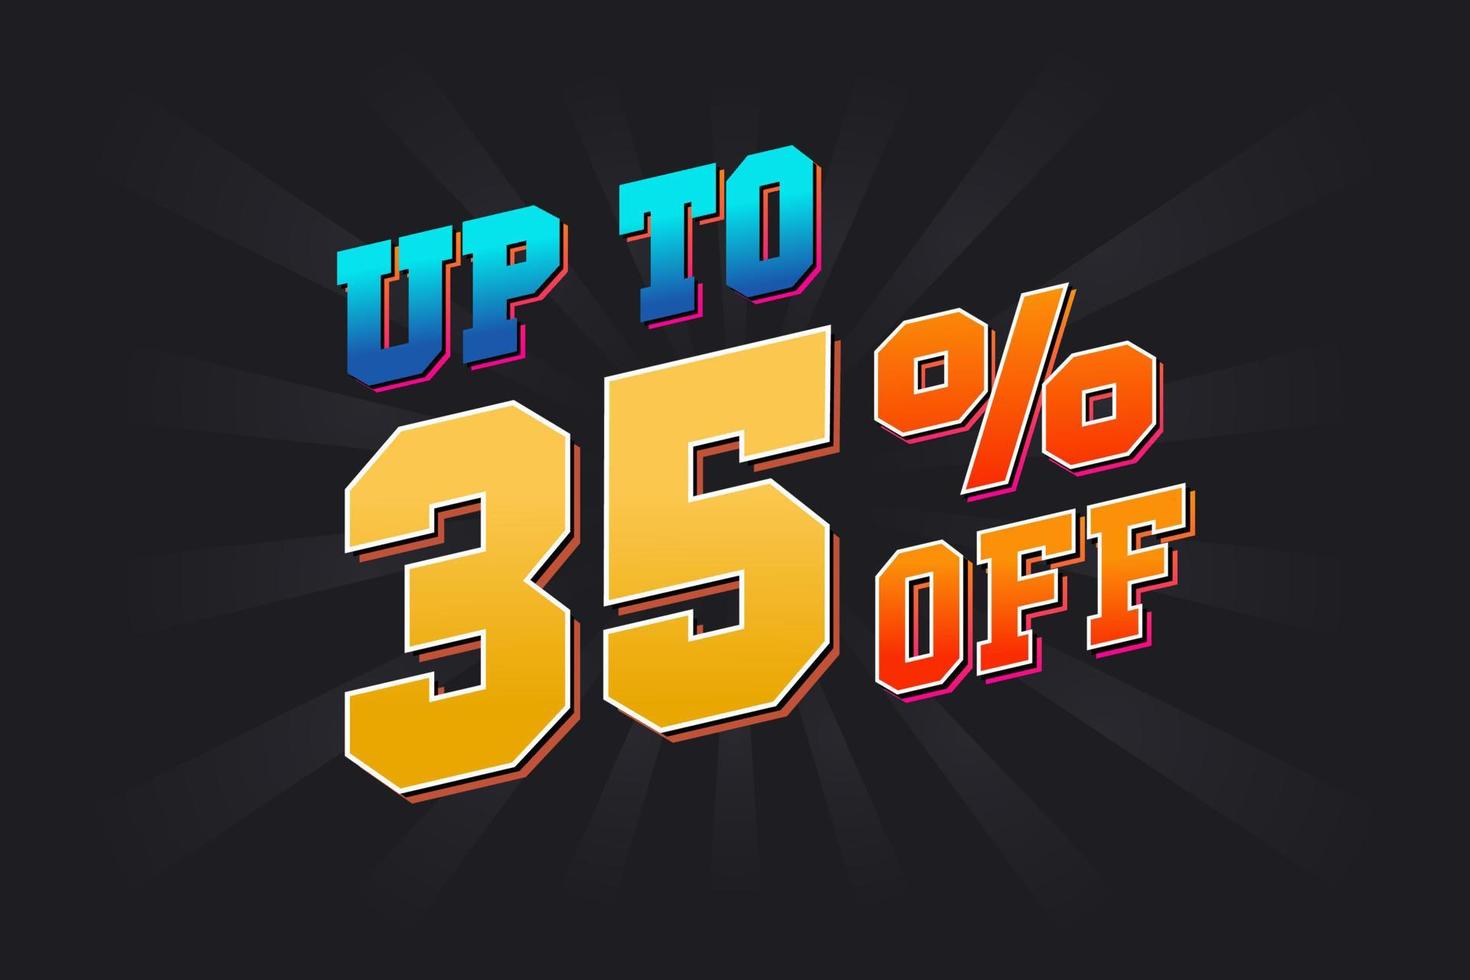 Up To 35 Percent off Special Discount Offer. Upto 35 off Sale of advertising campaign vector graphics.